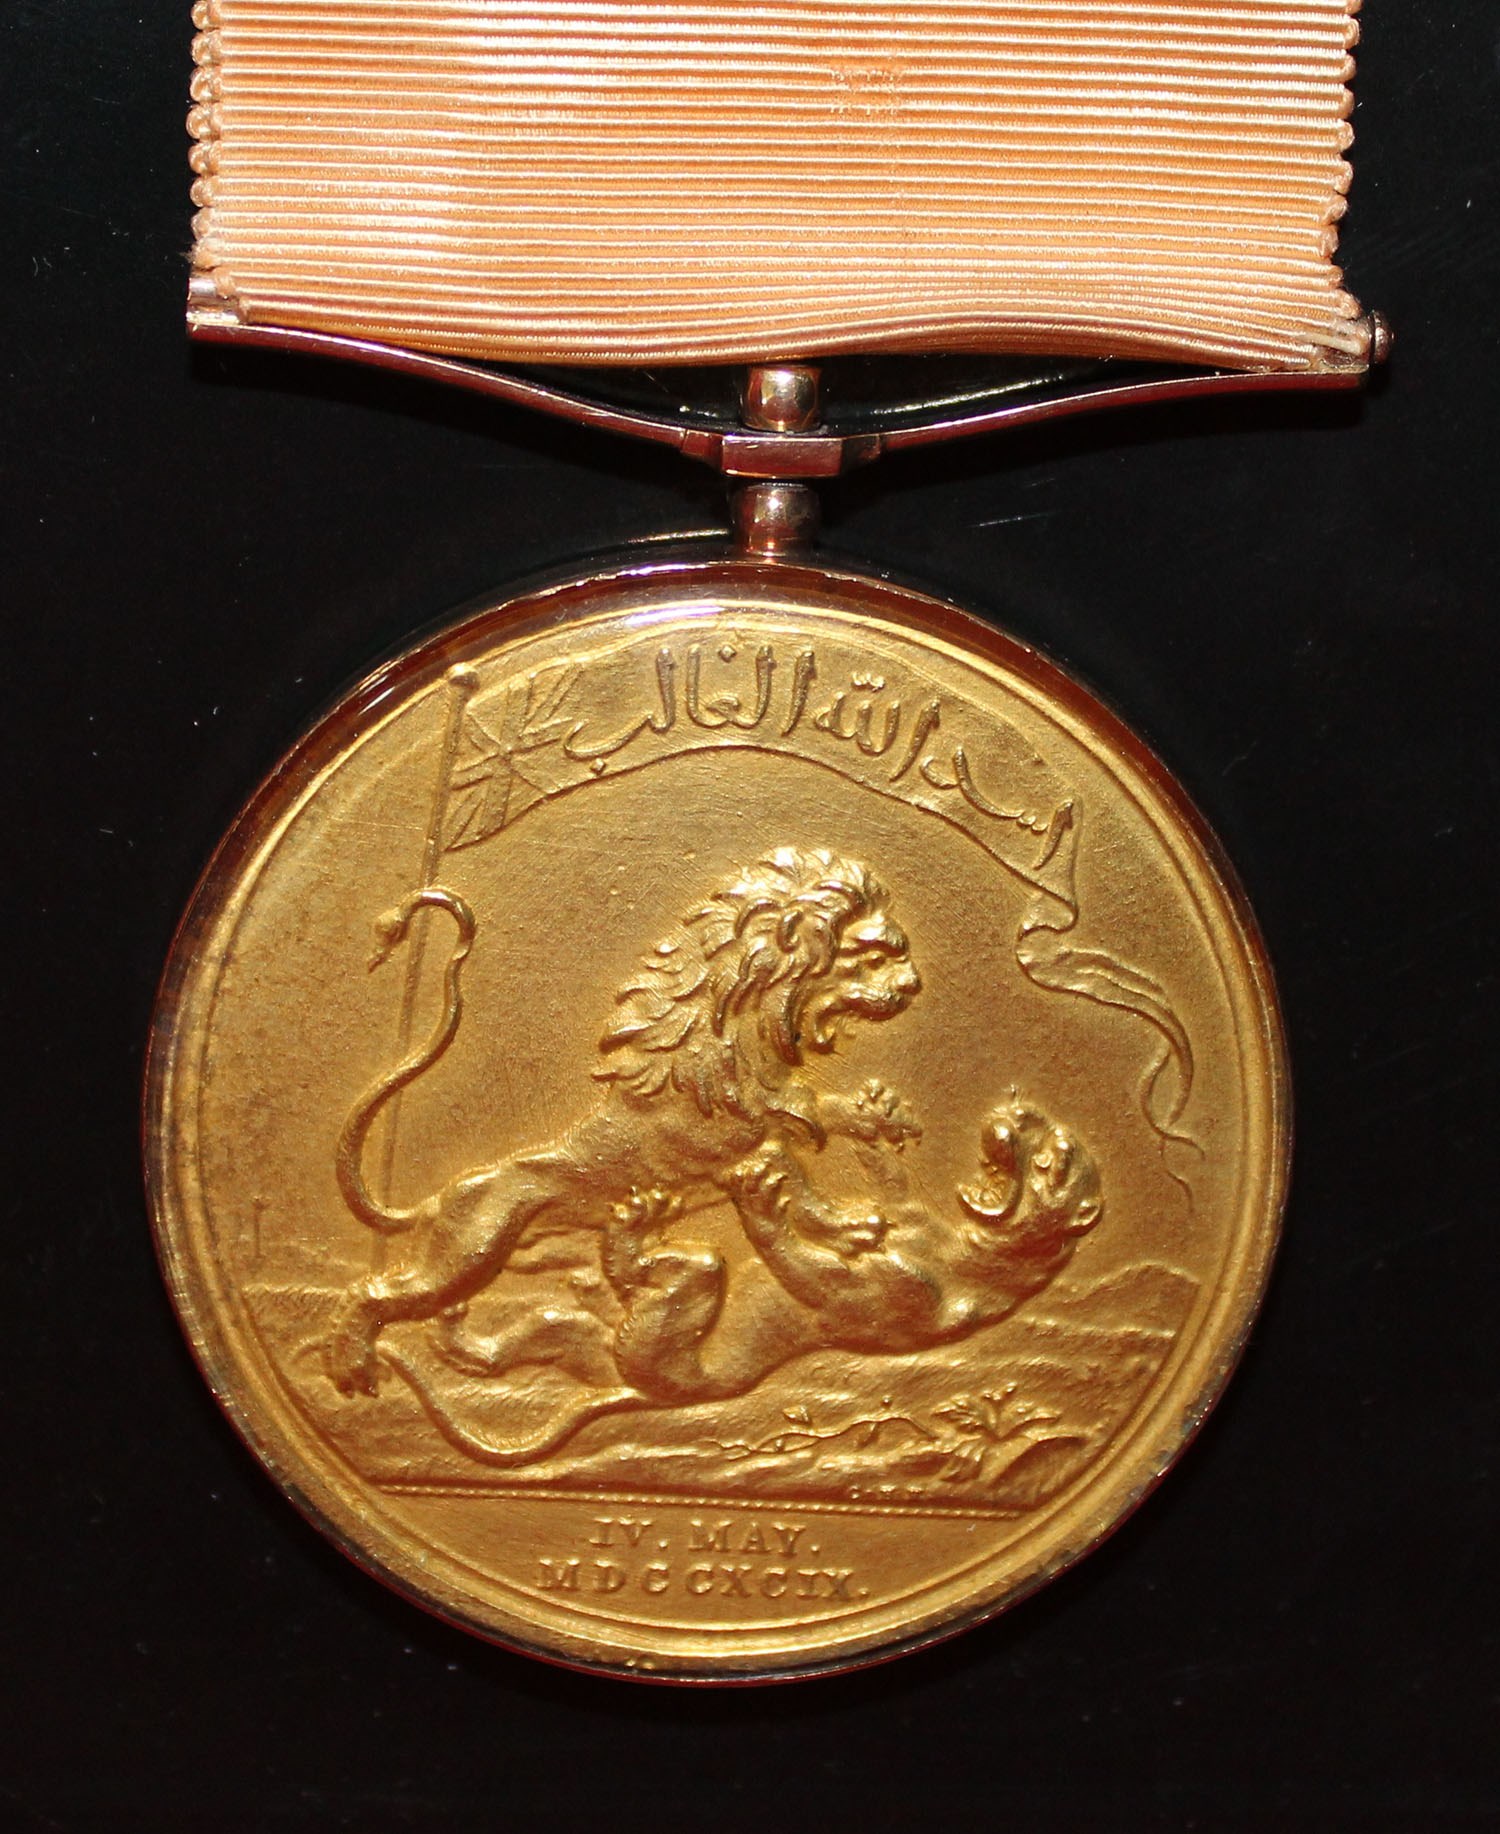 Gold medal for Seringapatam awarded to Lieutenant General Sir Archibald Campbell, on display in Gallery 1: A Nation in Arms